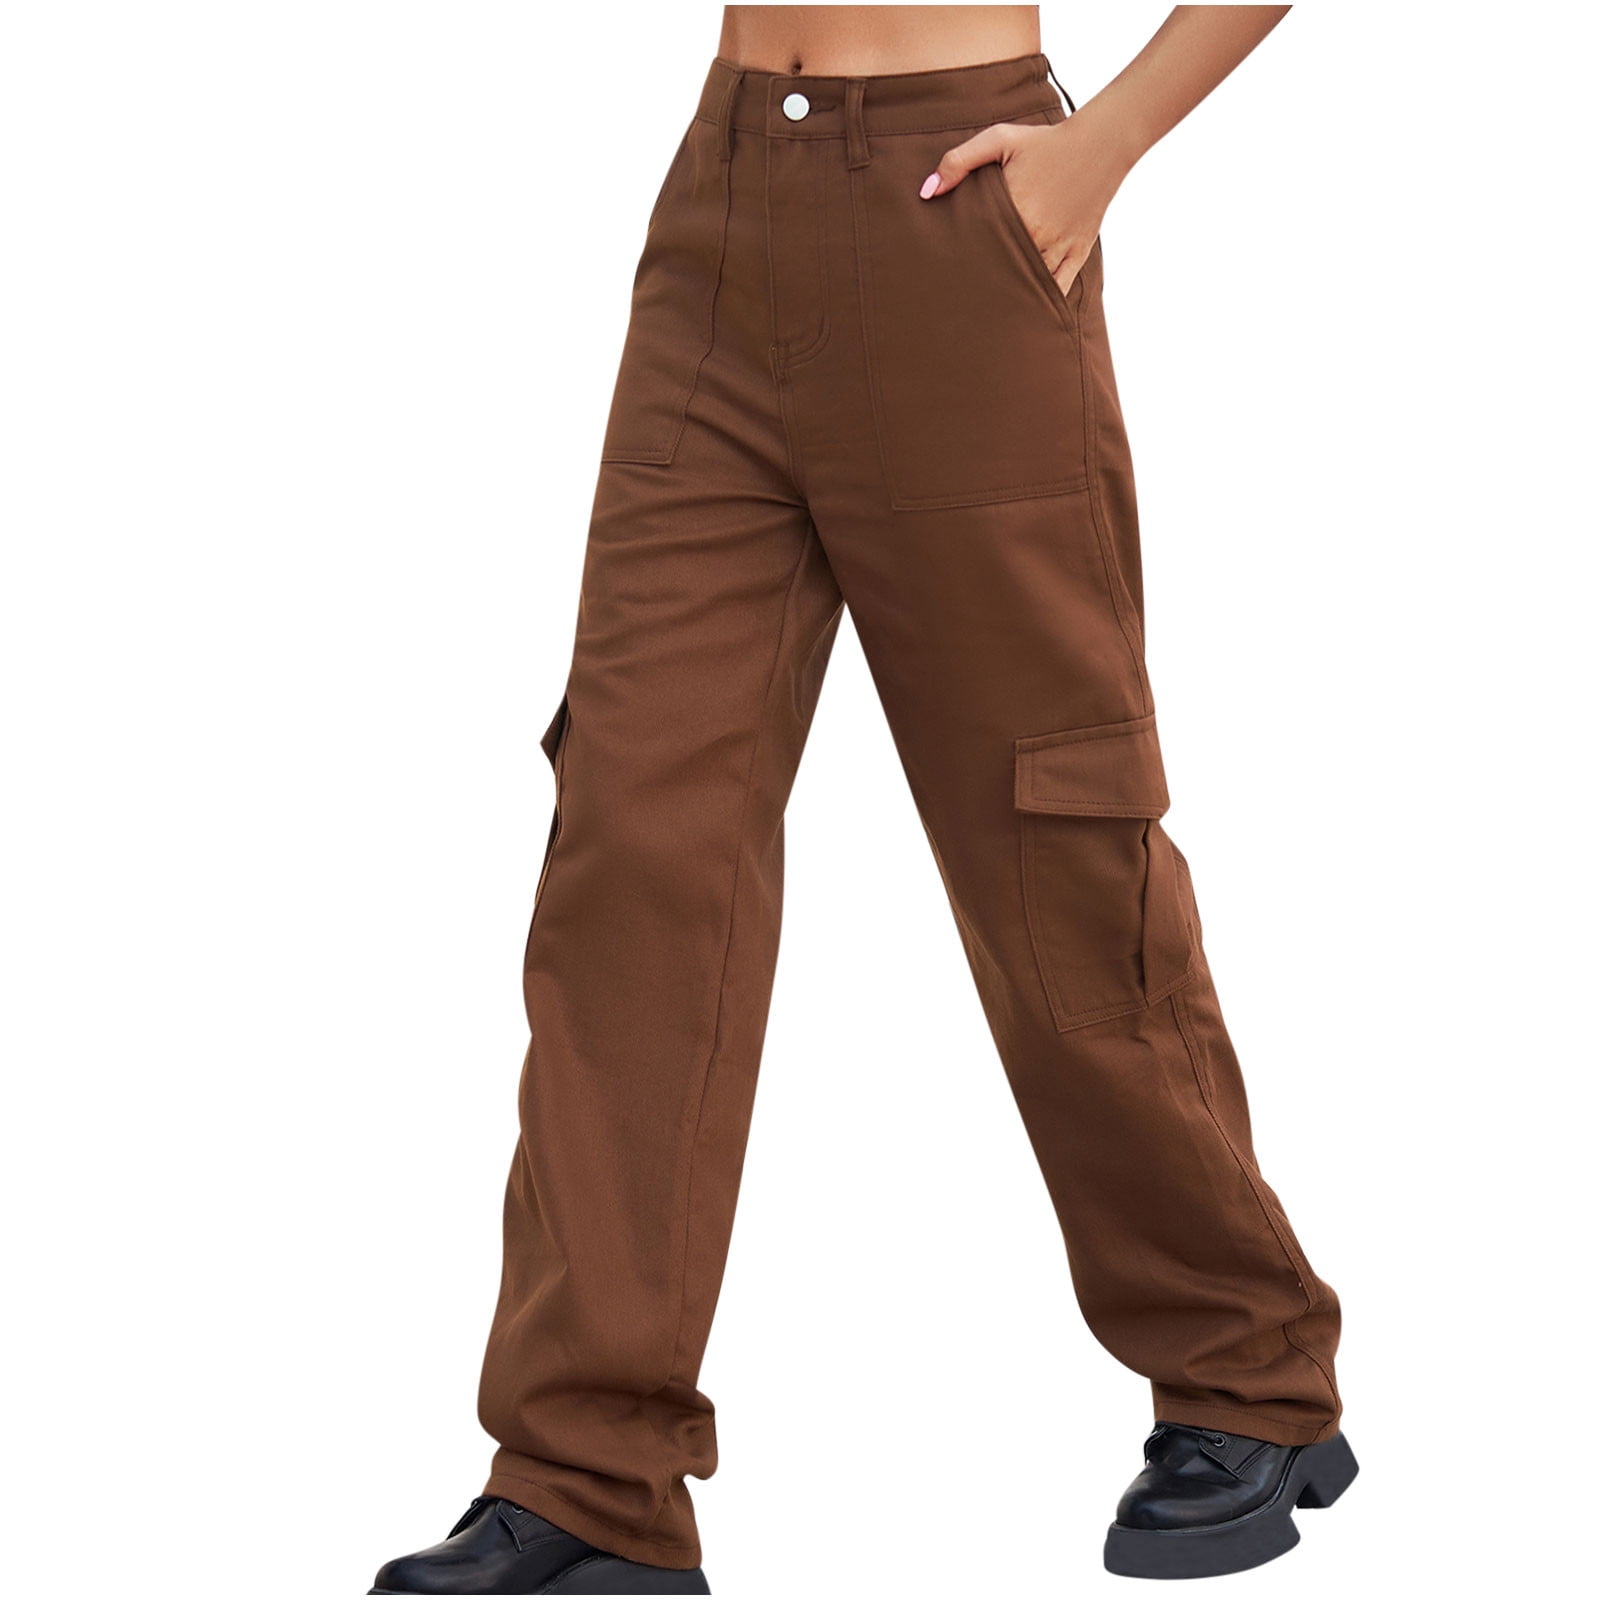 JWZUY Women High Waisted Cargo Pants Wide Leg Straight Casual Pants 6  Pockets Combat Military Trousers Brown XL 